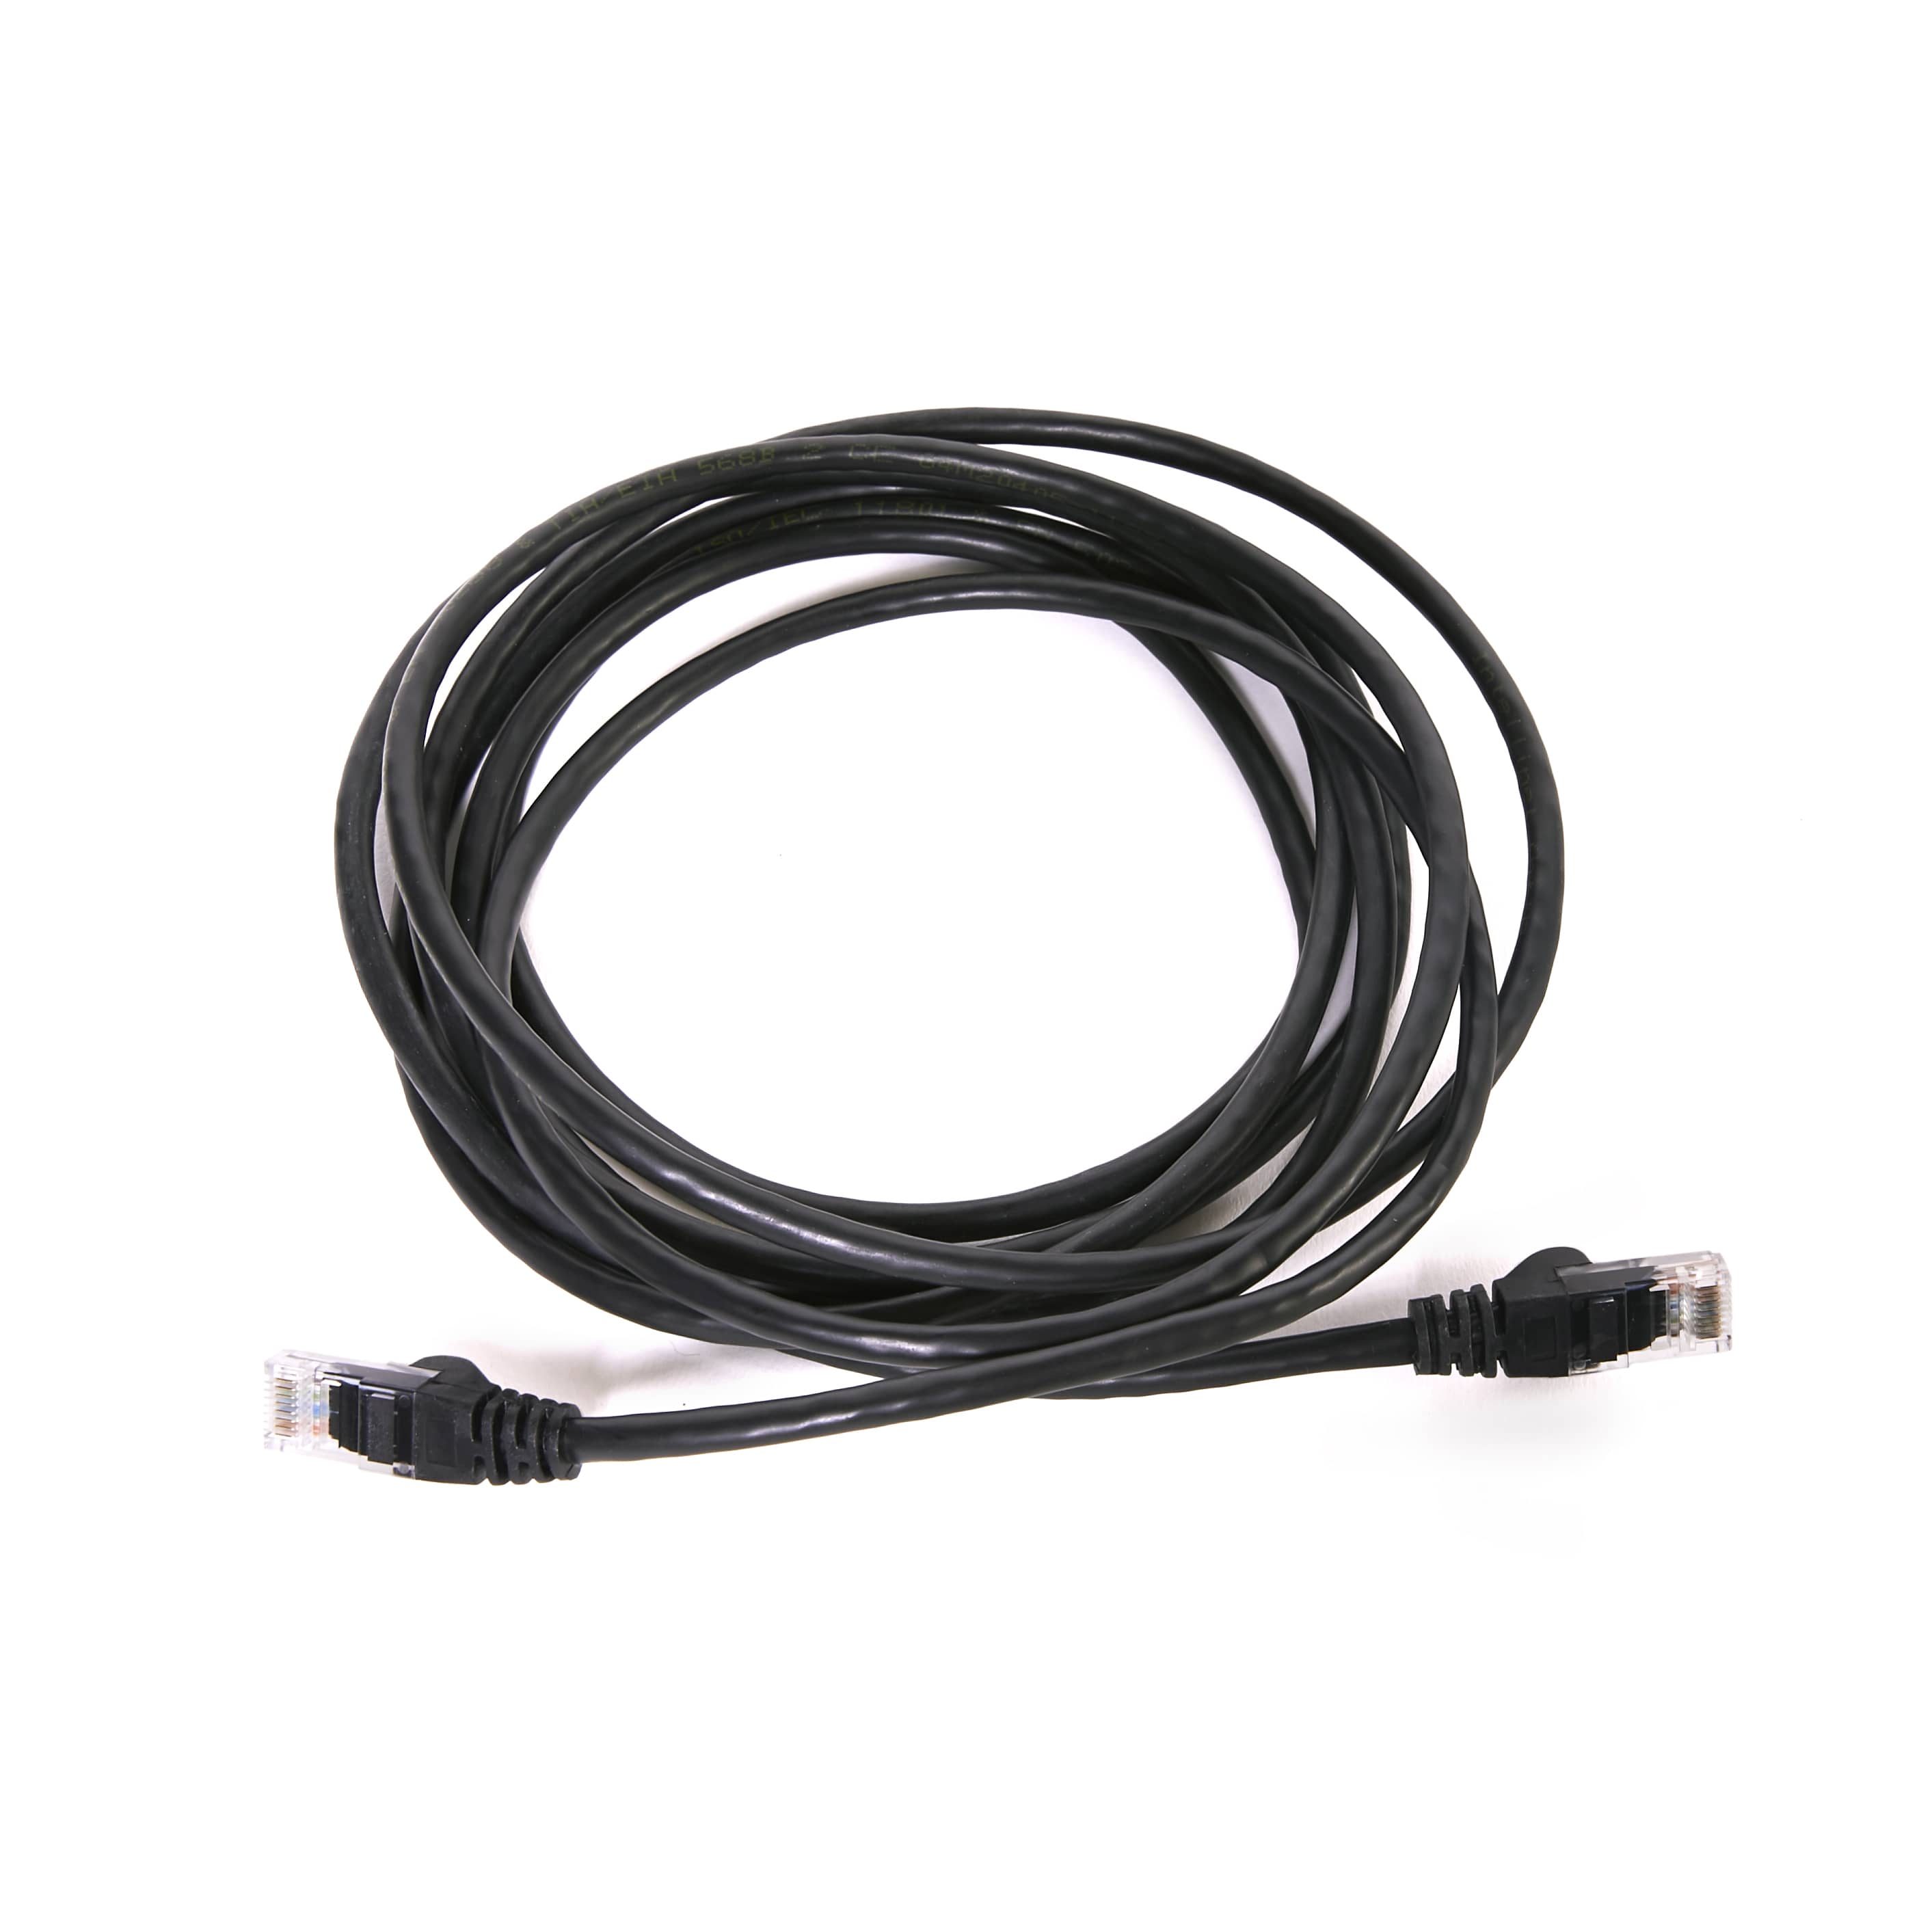 Image of a black ethernet cable.